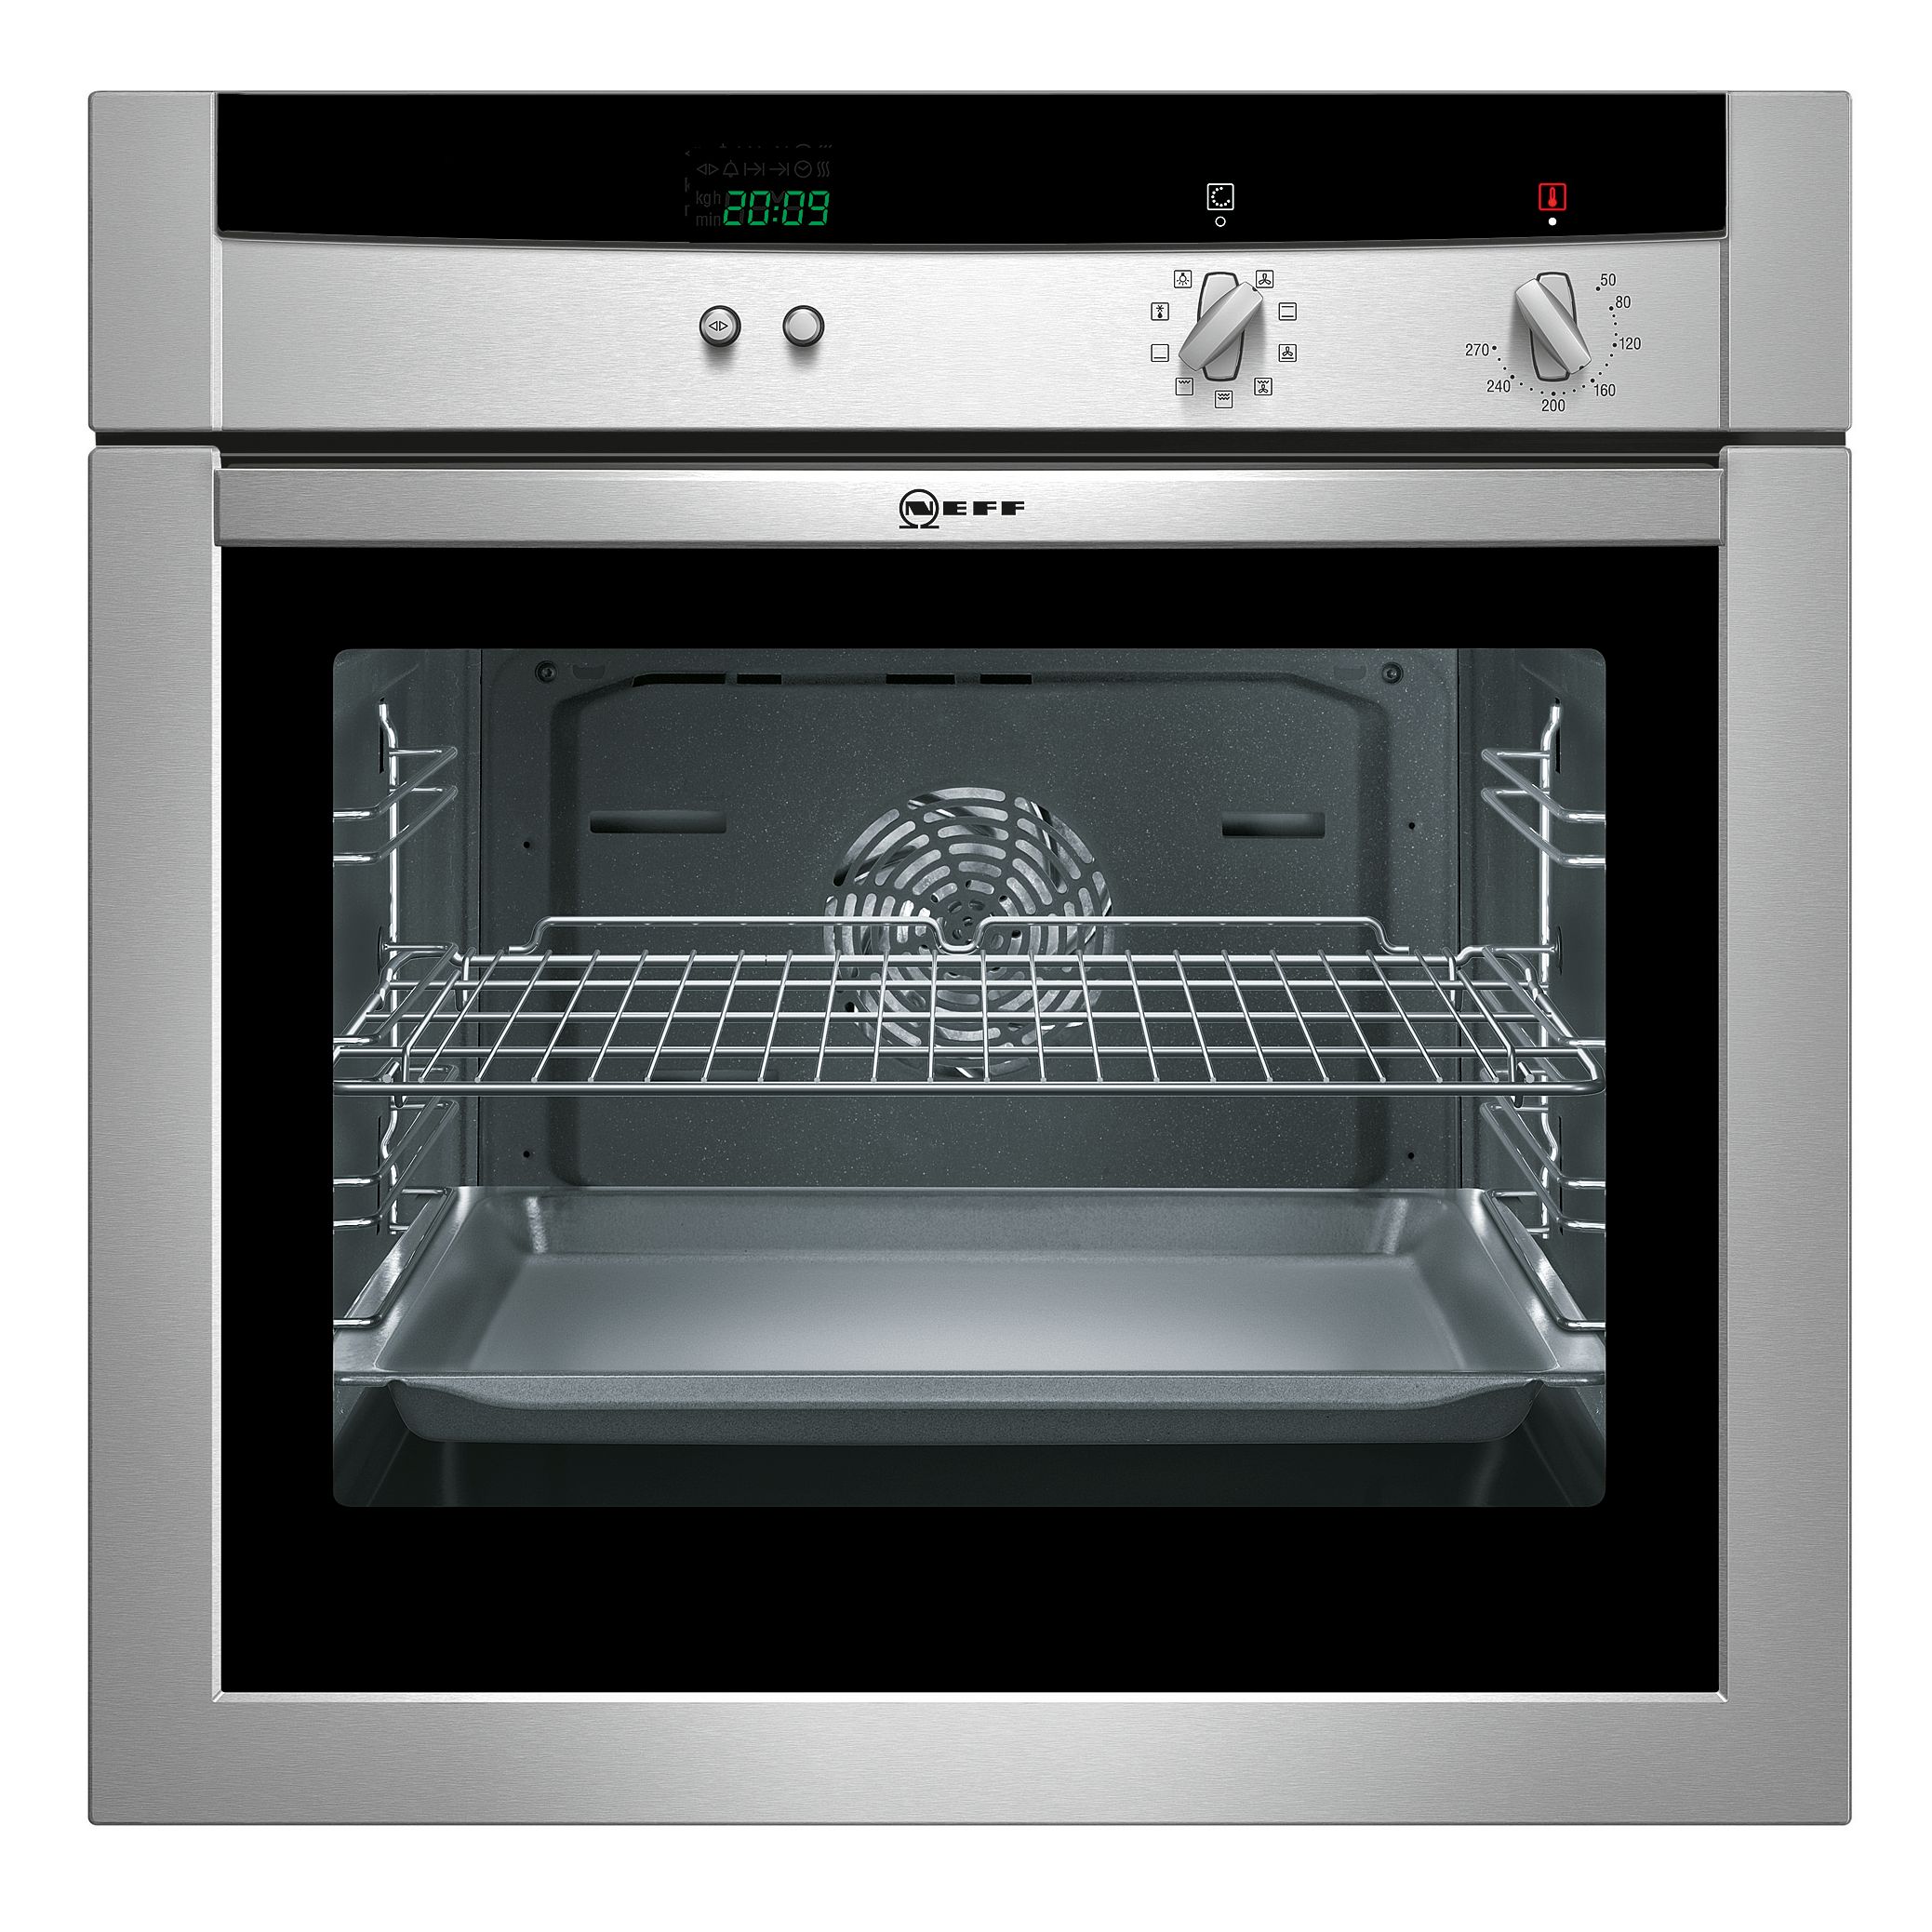 Neff B45M62N0GB Single Electric Oven, Stainless Steel at John Lewis